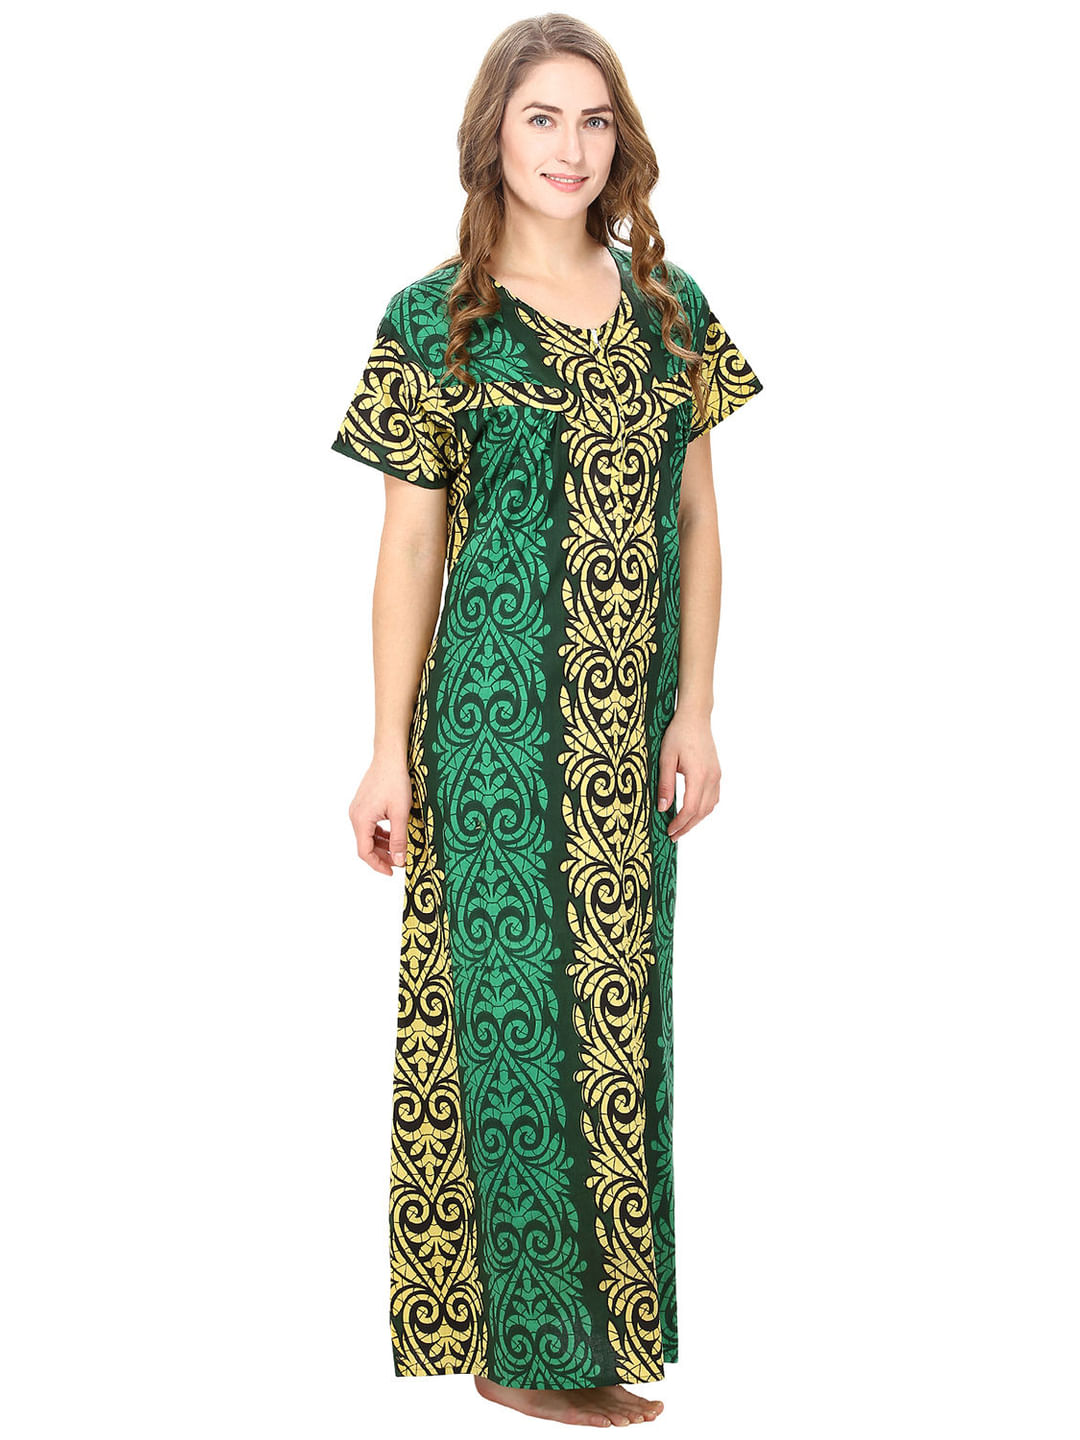 Cotton Green Printed Maternity Nighty (Free Size)